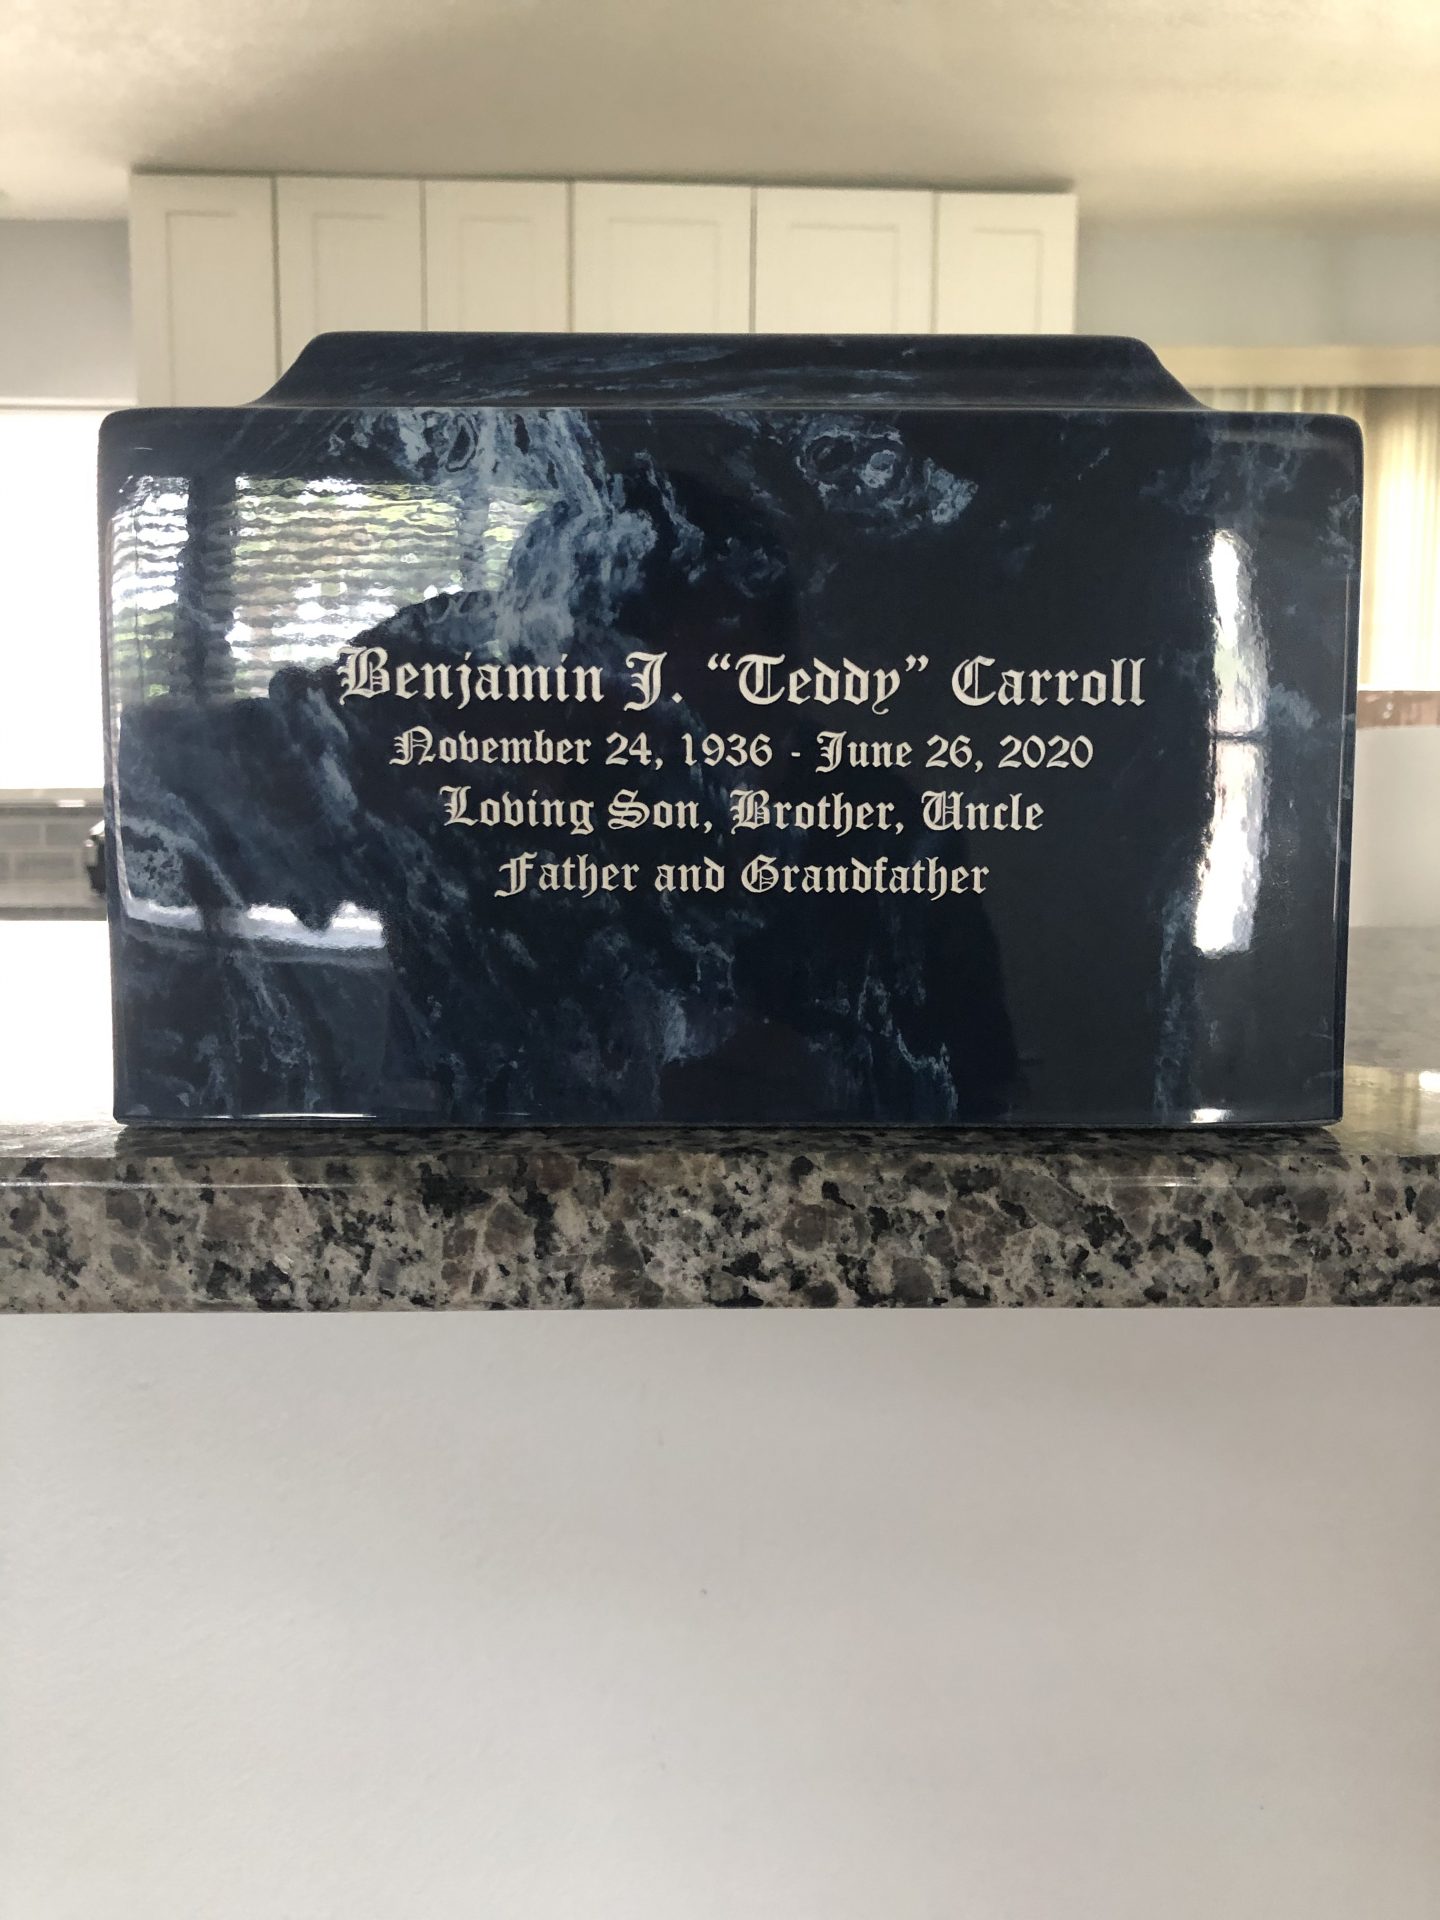 Dads urn and remains.<br />
Received July 9, 2020